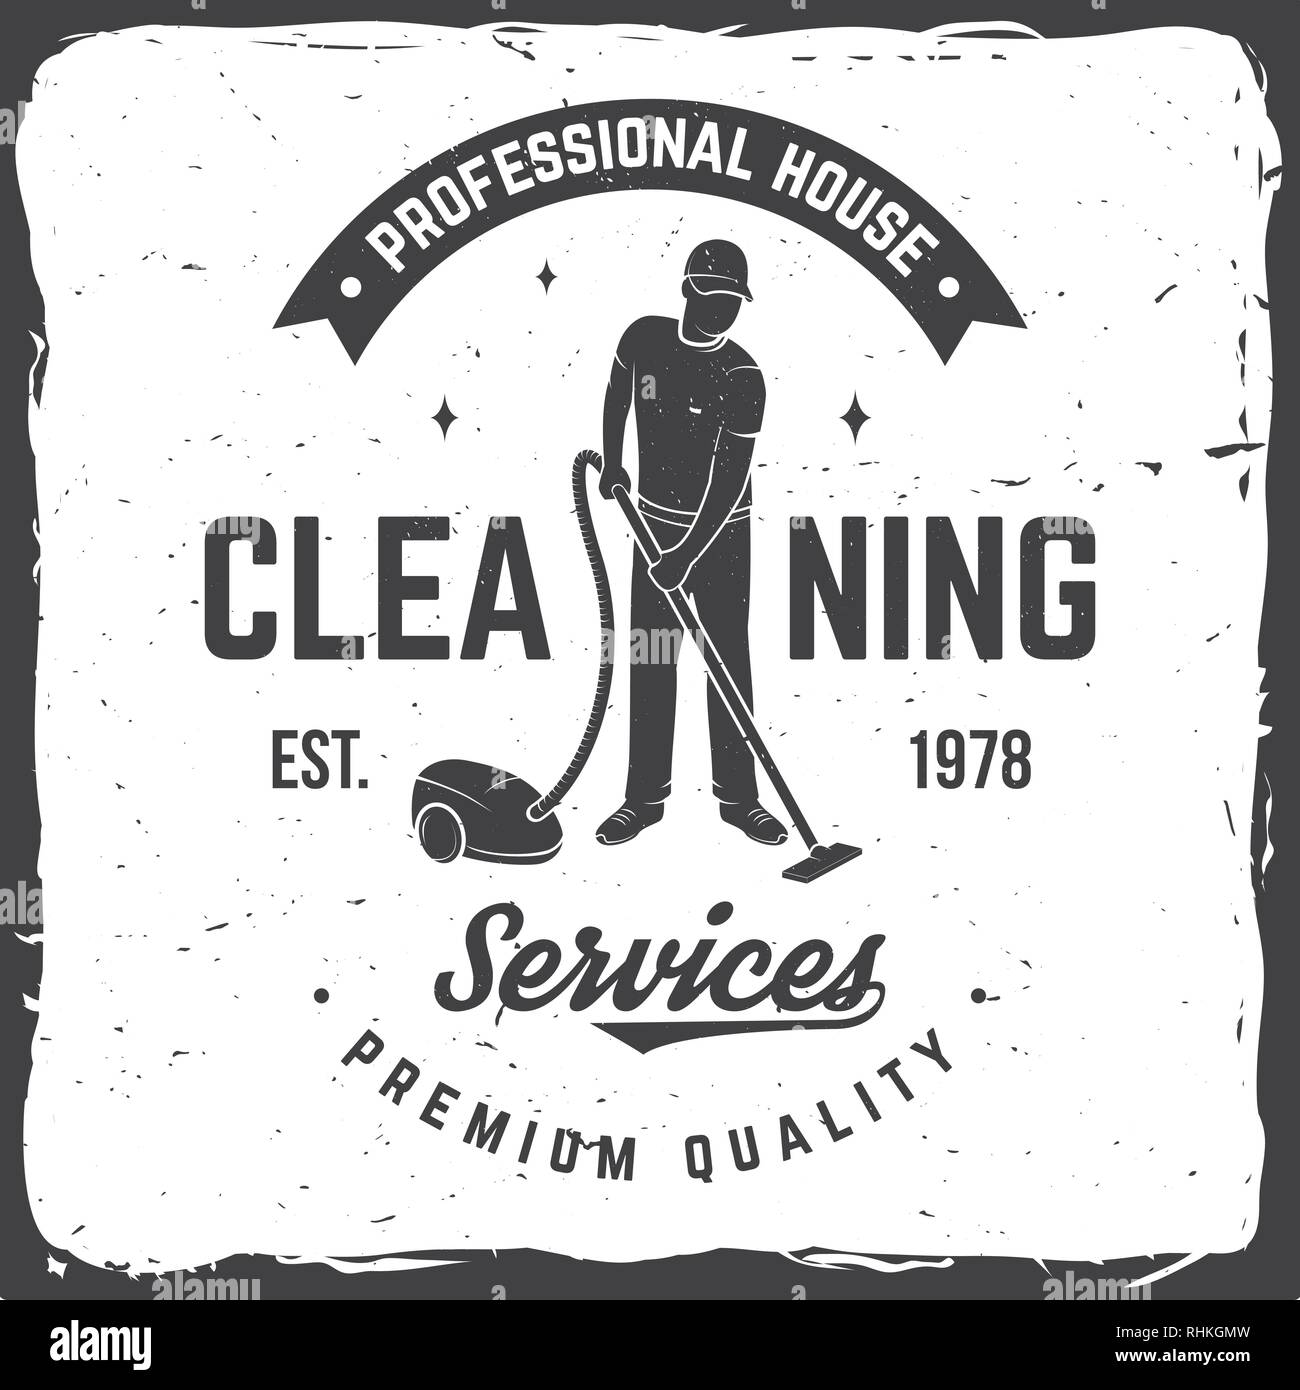 Cleaning company badge, emblem. Vector illustration. Concept for shirt, print, stamp or tee. Vintage typography design with man and Vacuum Cleaner. Cleaning service sign for company related business Stock Vector